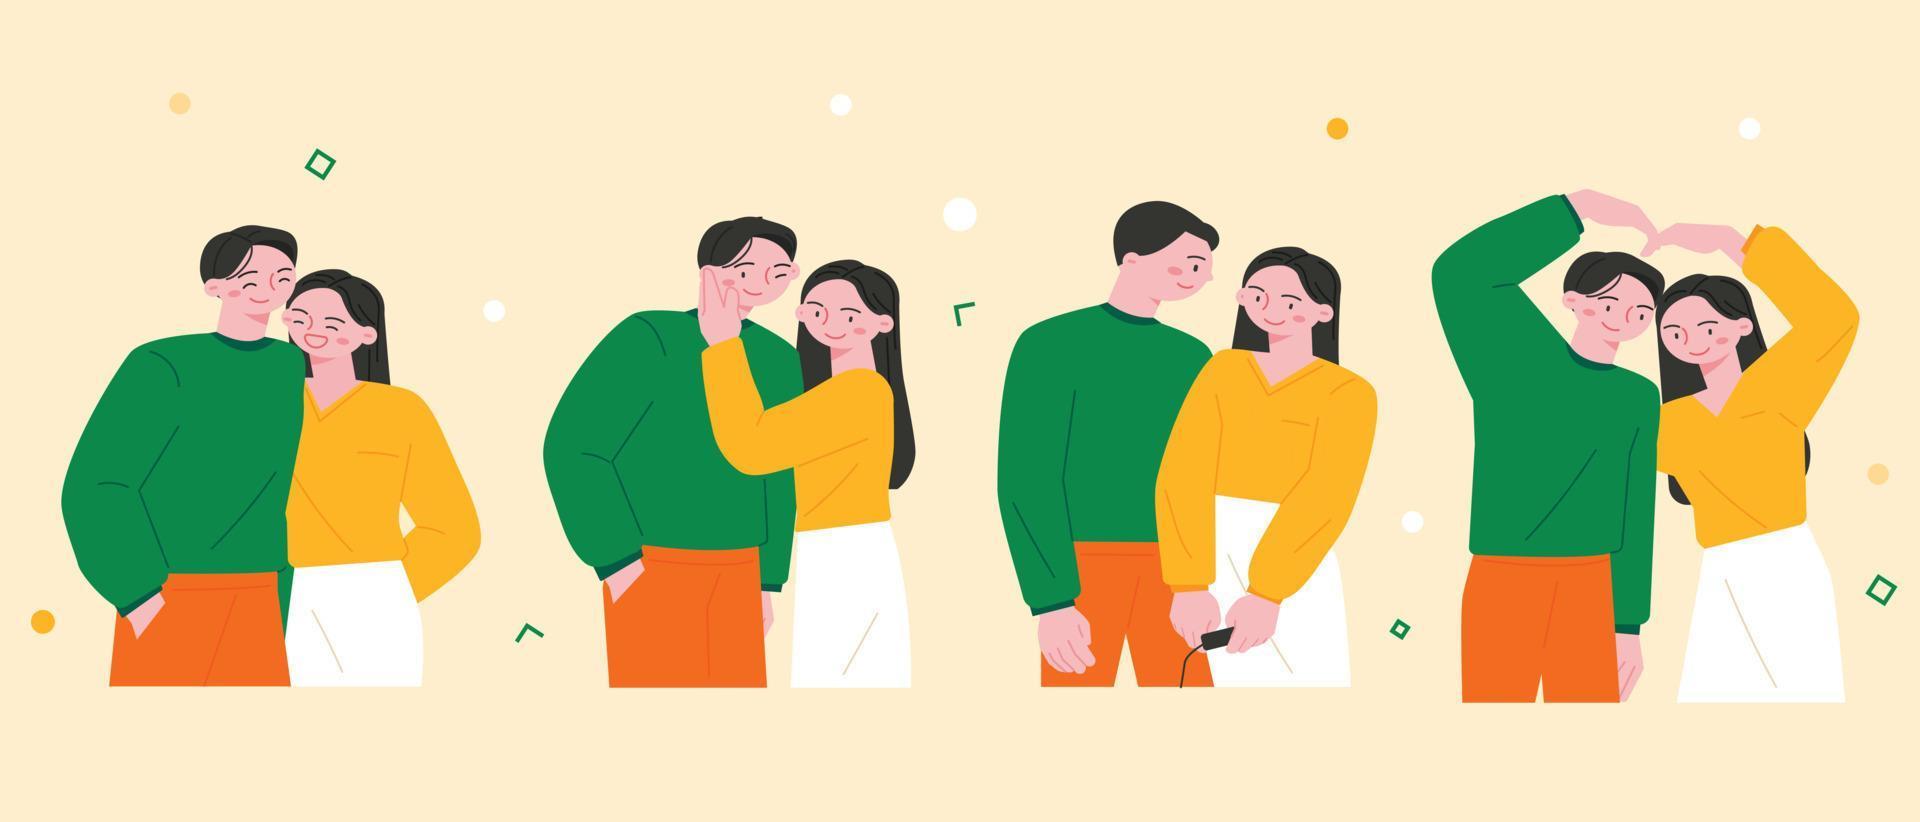 A man and a woman are doing various affectionate poses. vector